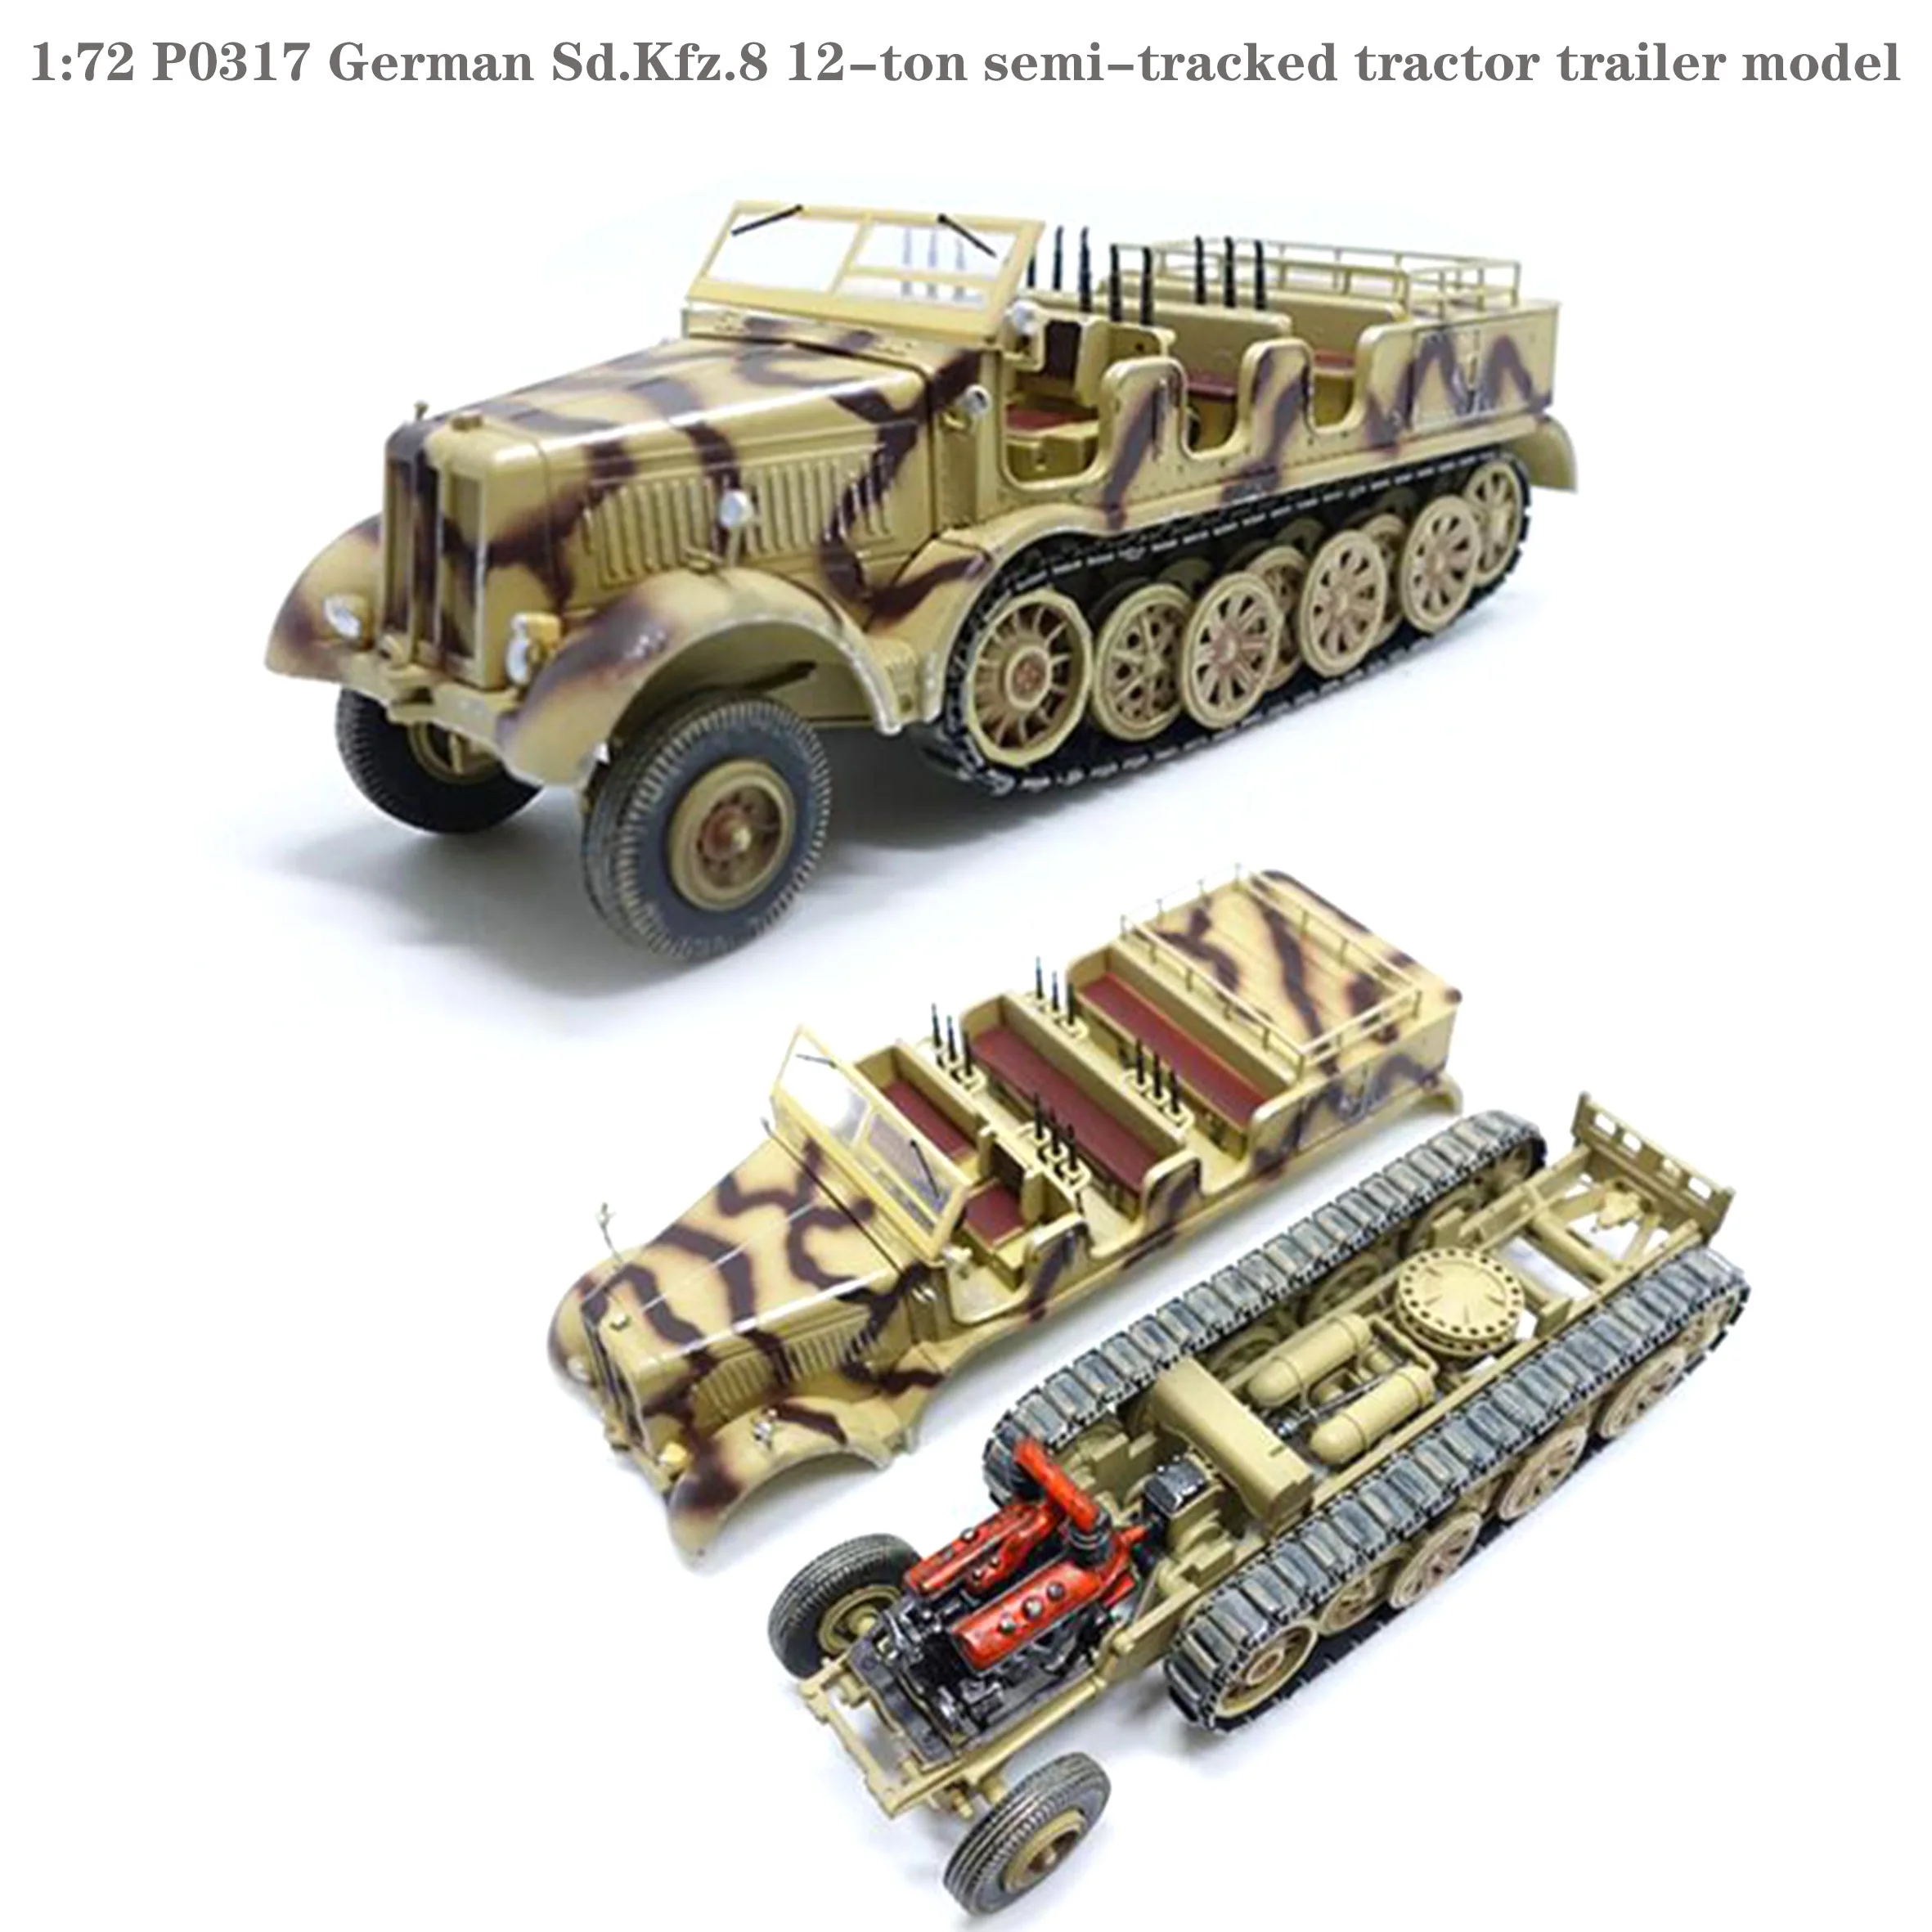 fine-1-72-p0317-german-sdkfz8-12-ton-semi-tracked-tractor-trailer-model-finished-product-collection-model